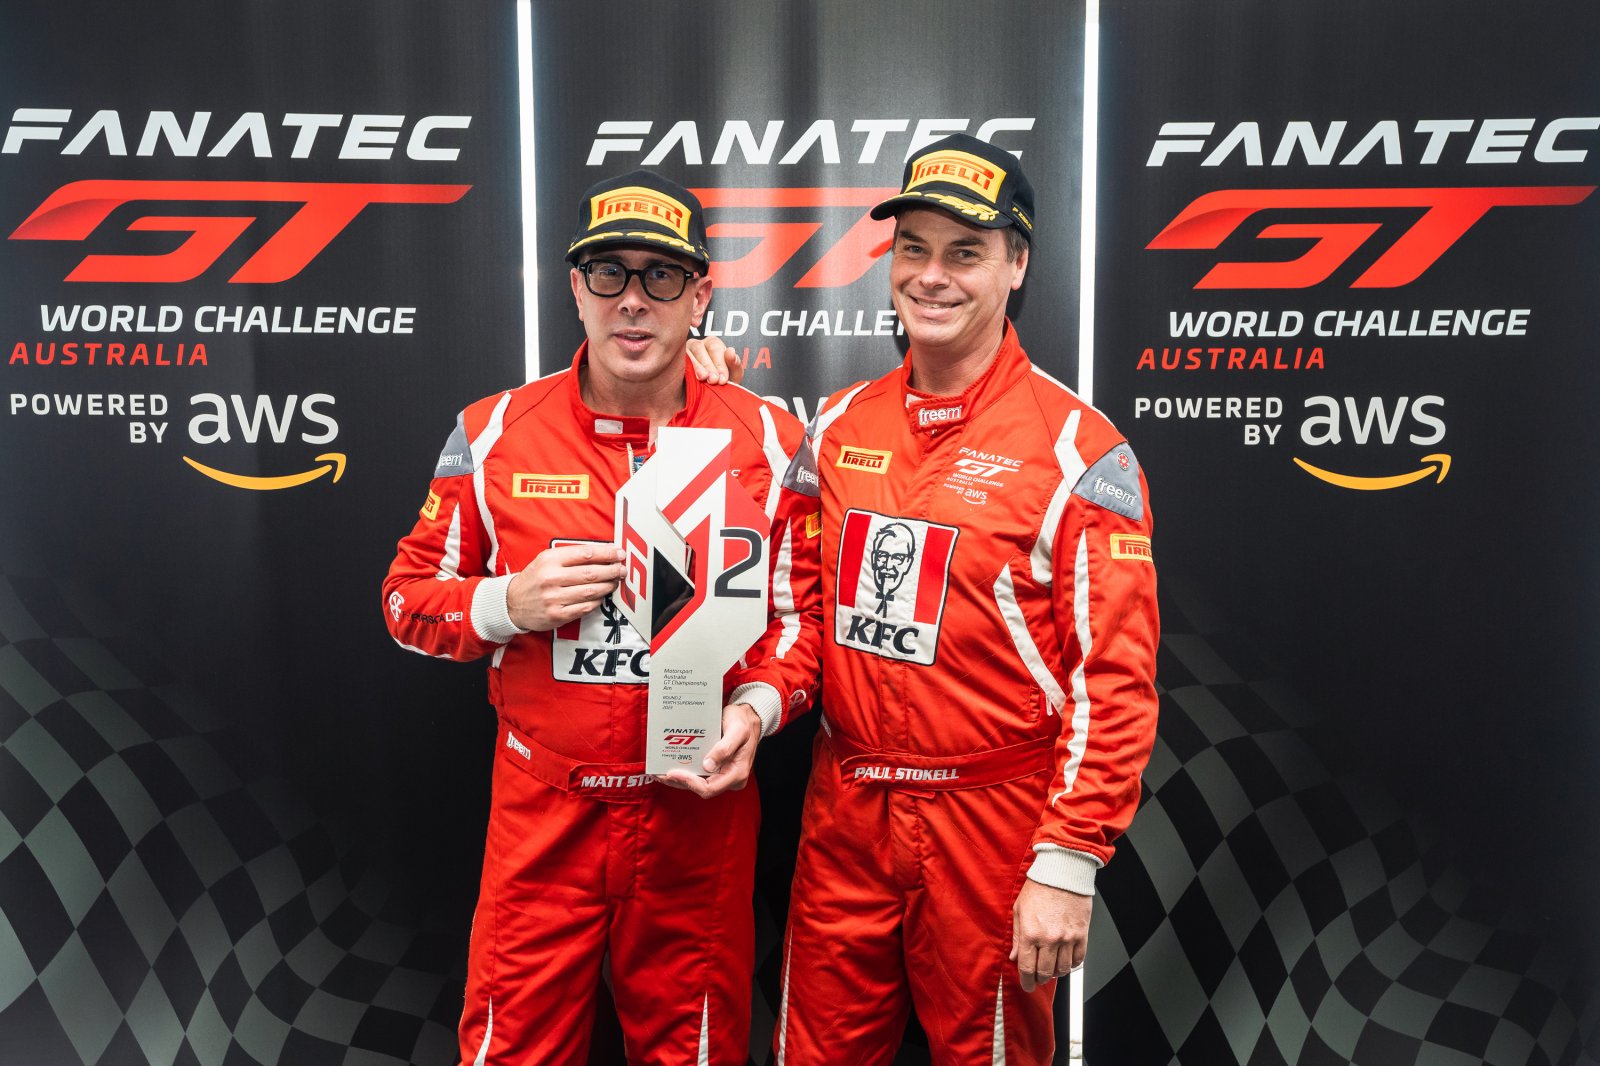 Experienced co-driver to join Renee Gracie in Fanatec GT World Challenge Australia powered by AWS attack